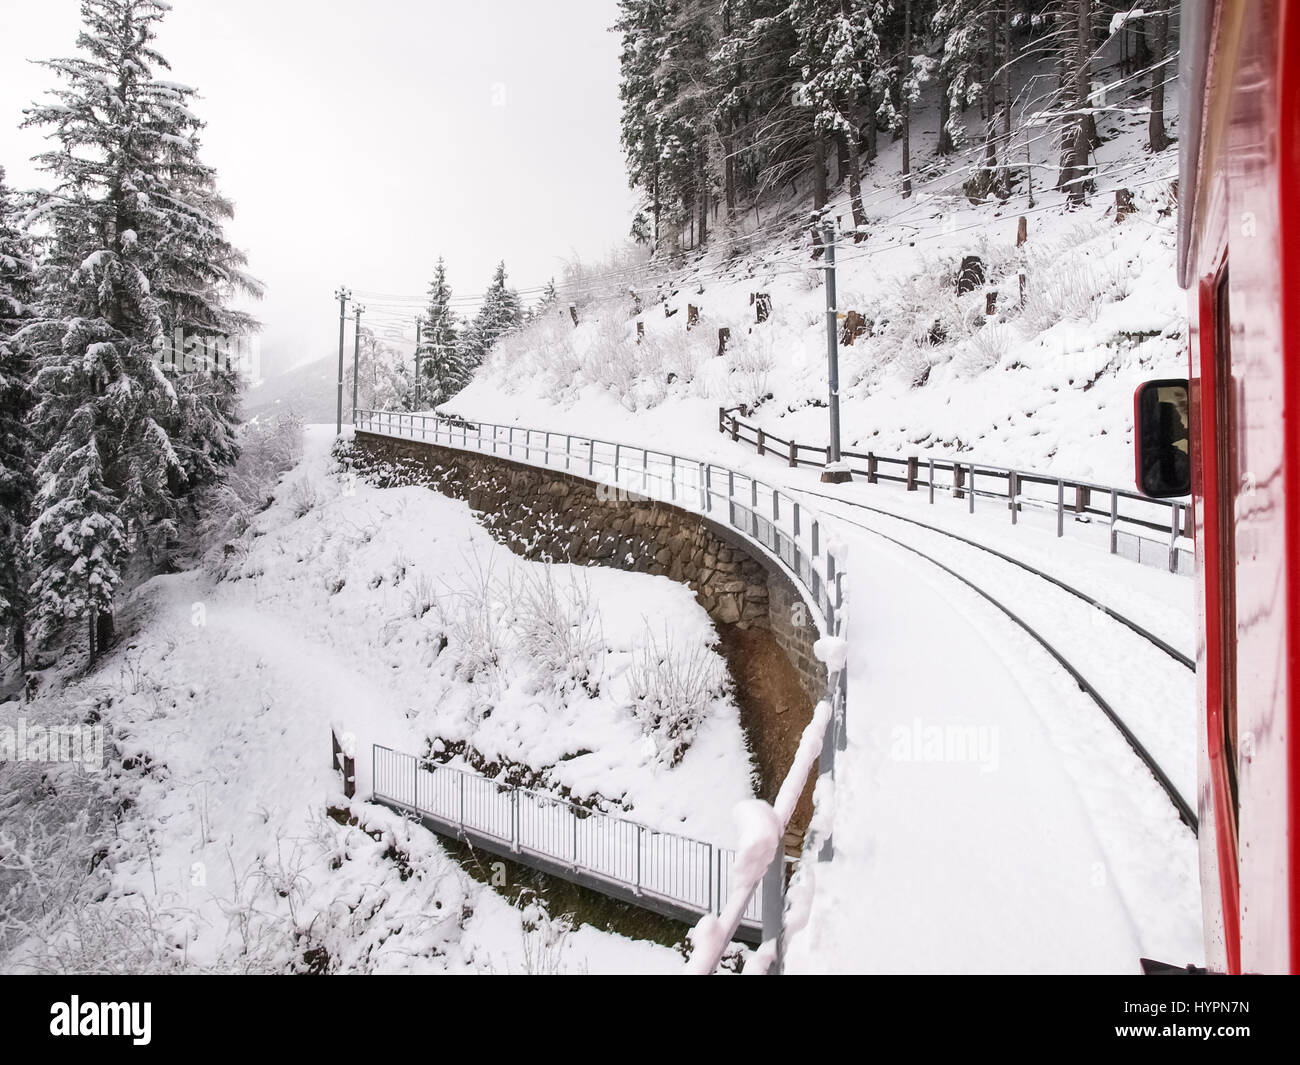 Bernina, Switzerland - April 27, 2016: trains of the Rhaetian Railway in transit along the line Tirano - St.Moritz during a snowy day. Stock Photo